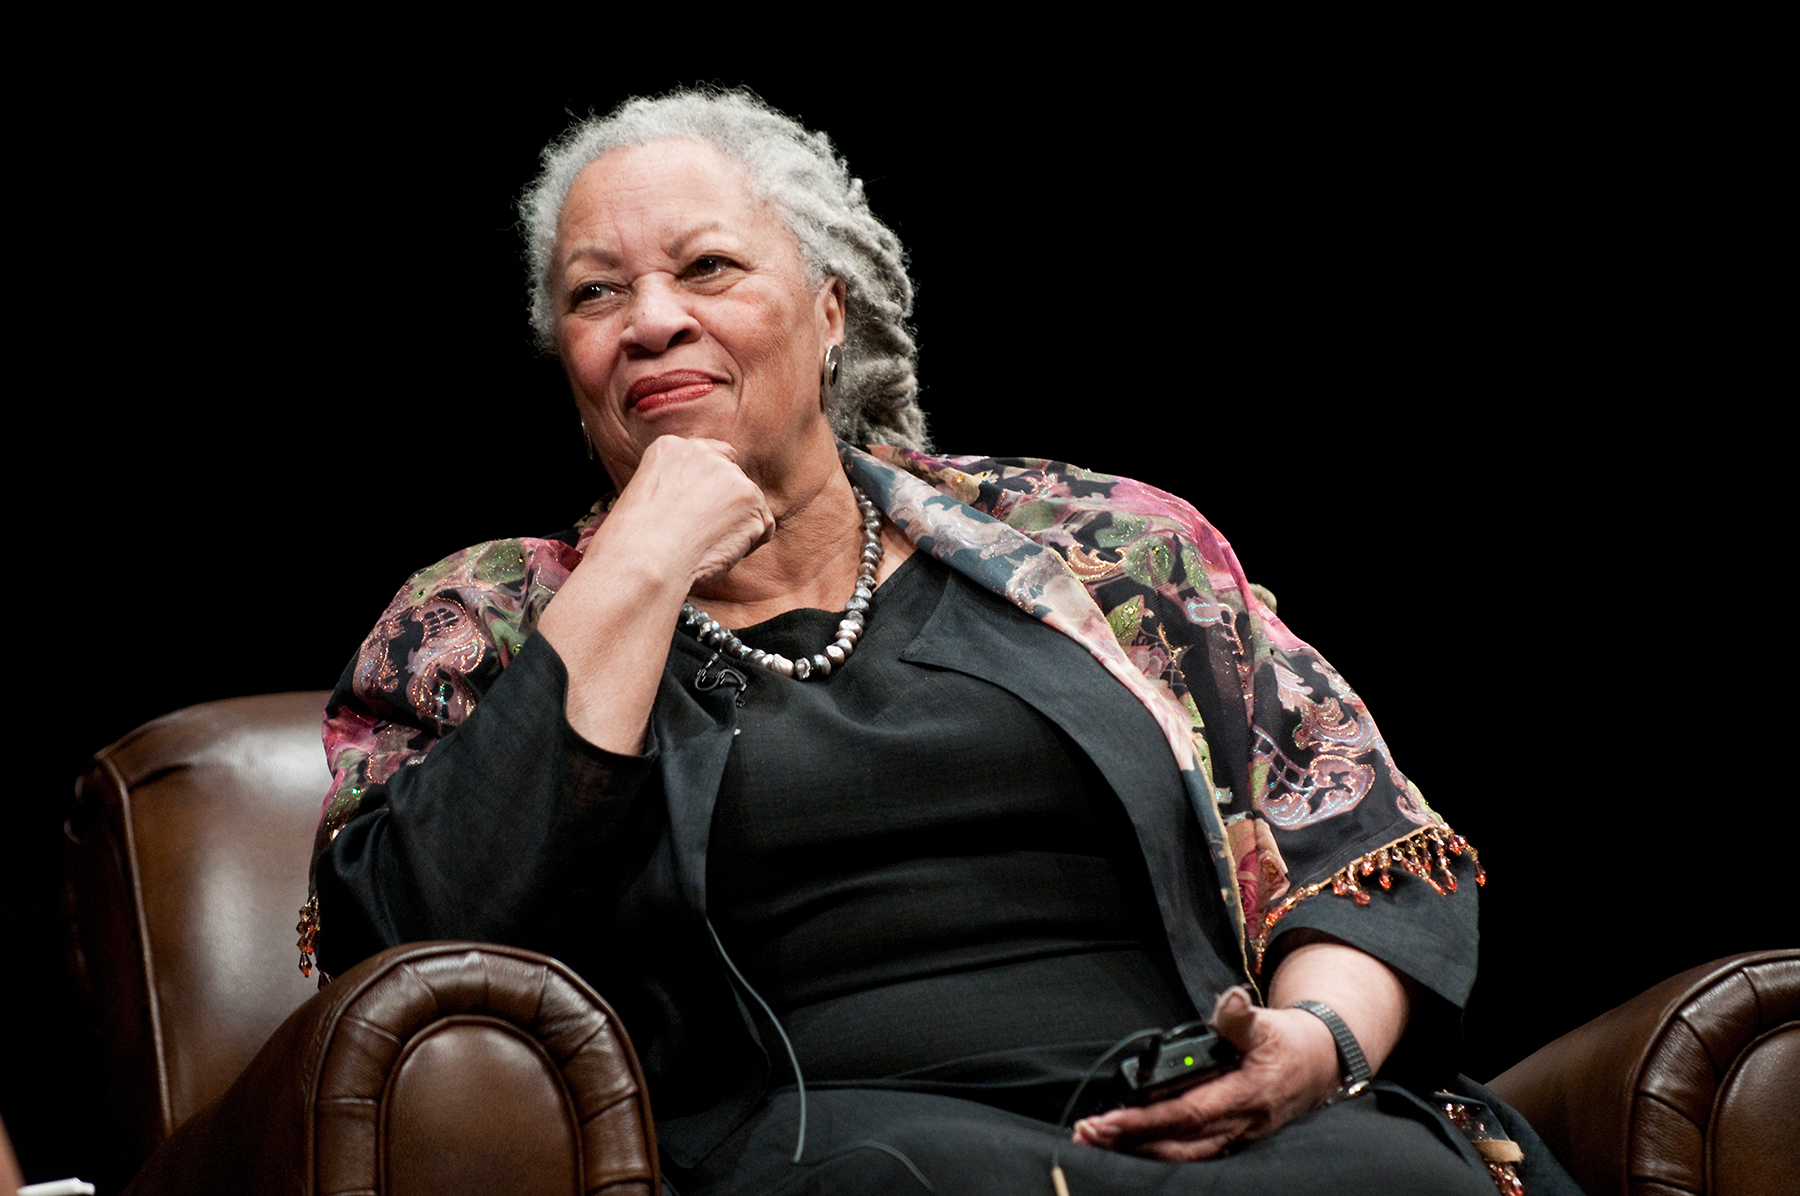 Toni Morrison attends the Carl Sandburg literary awards dinner at the University of Illinois at Chicago Forum on October 20, 2010 in Chicago, Illinois. (Daniel Boczarsk—Getty Images)